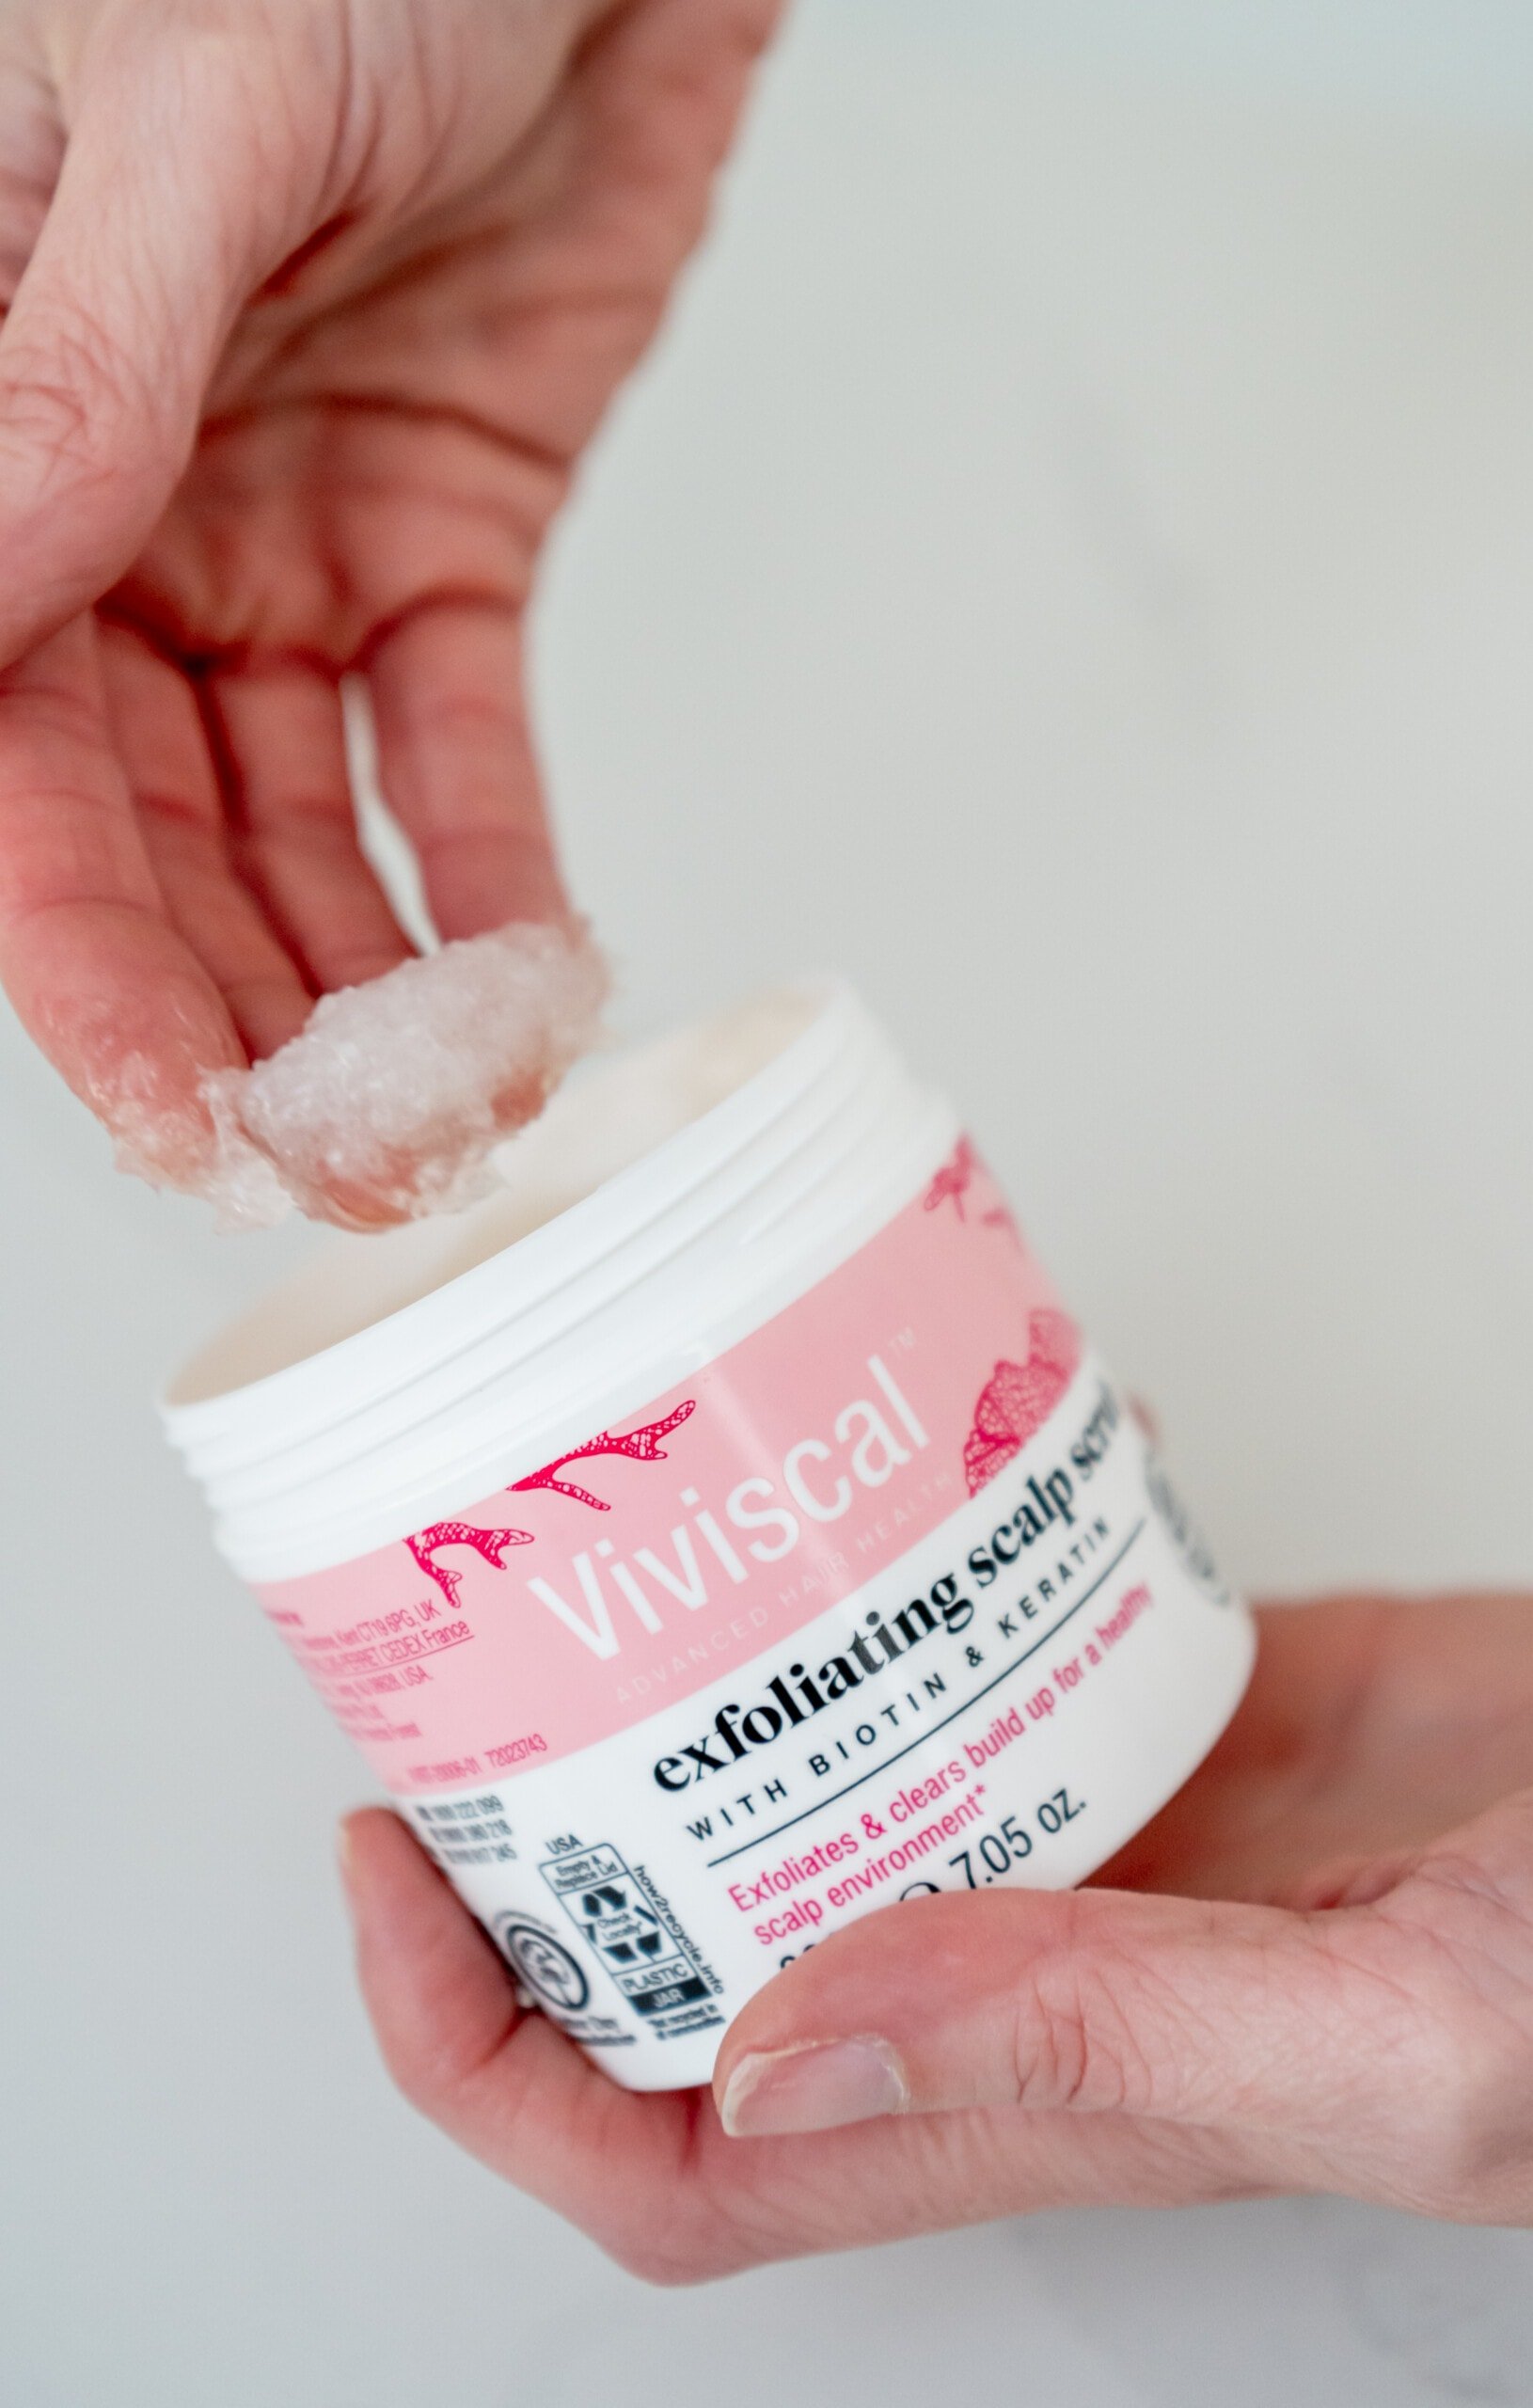 Hand scooping out some of the Viviscal exfoliating scalp scrub